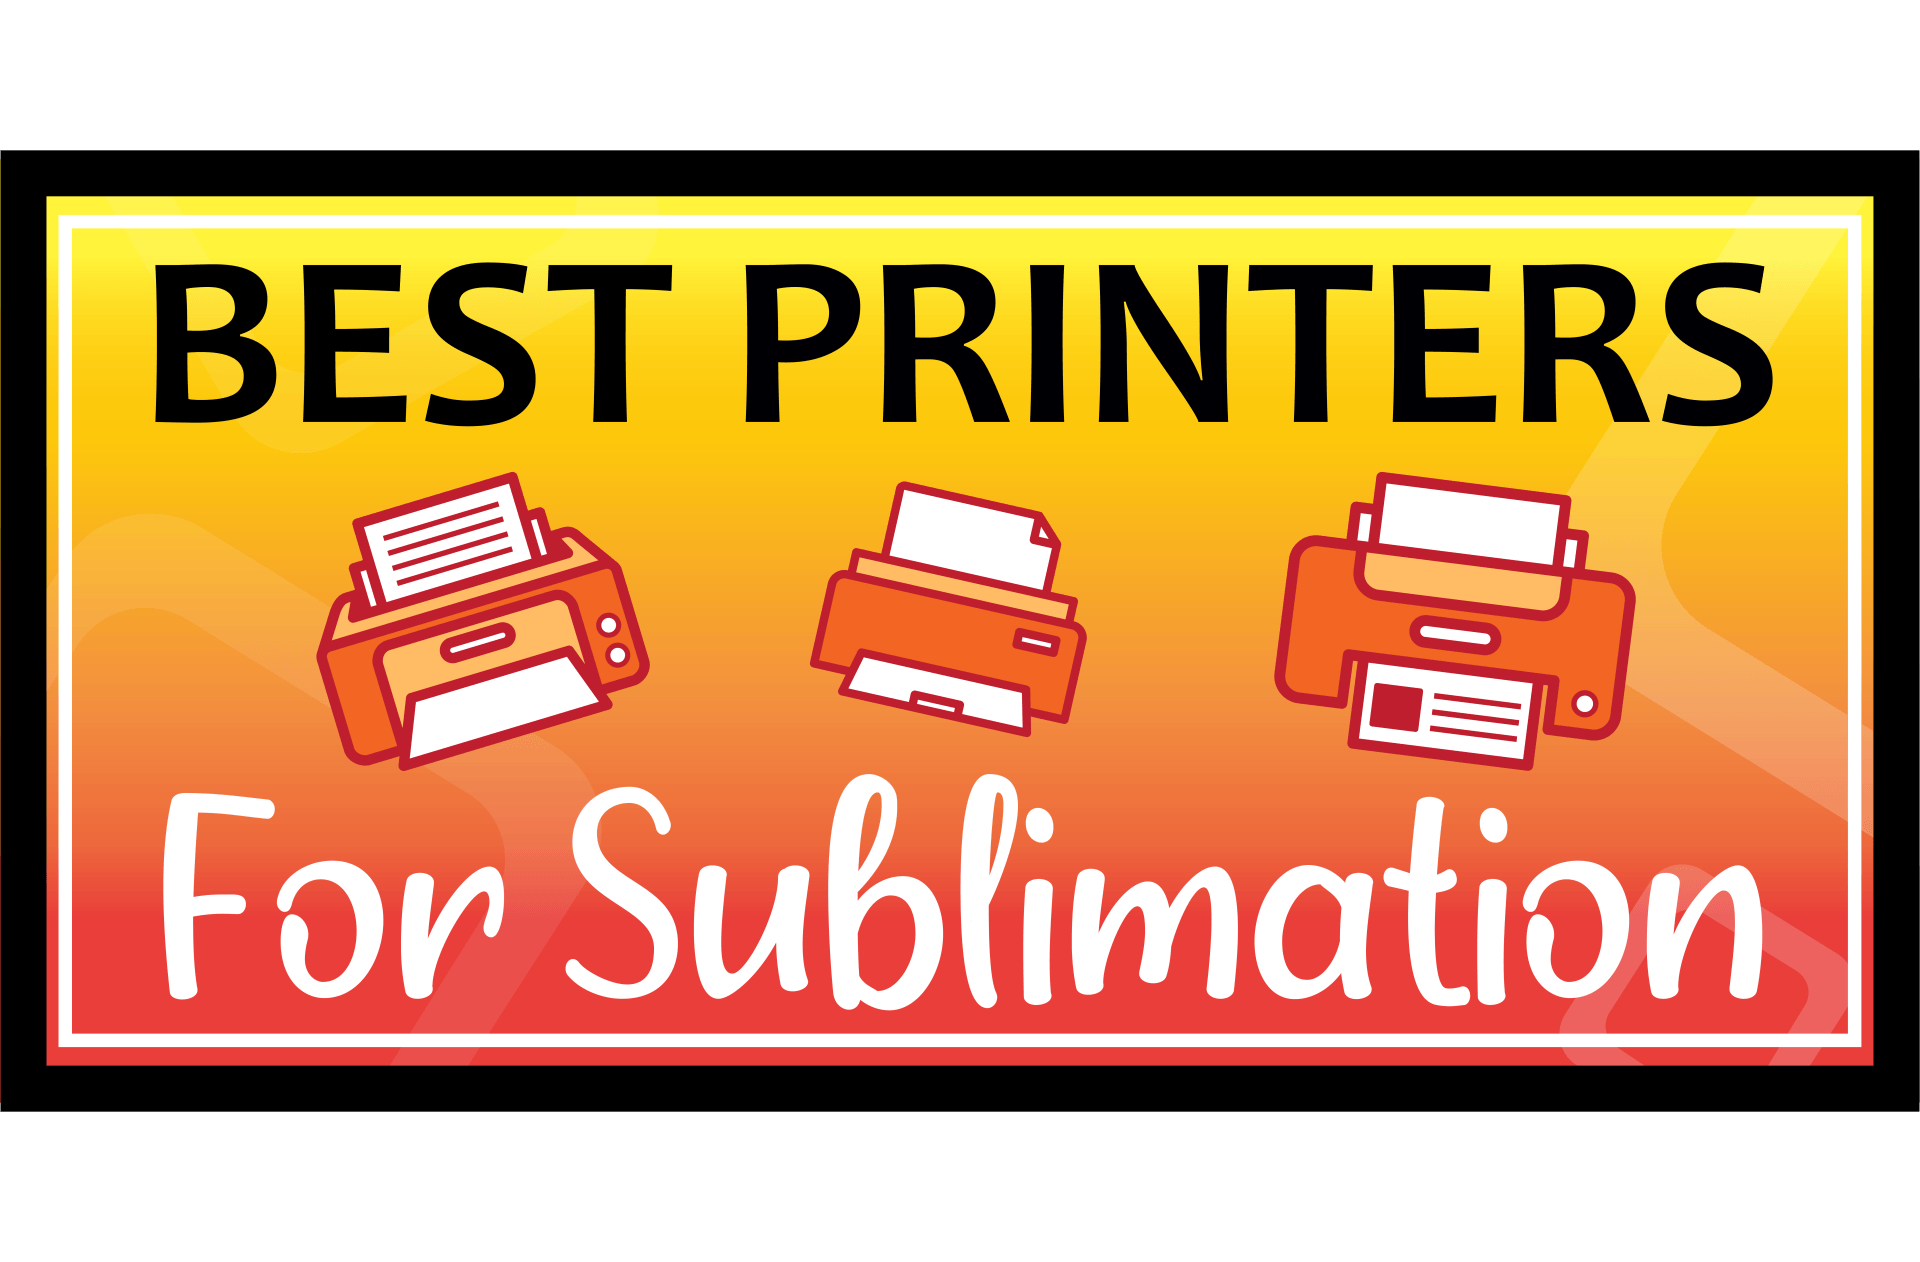 Cricut Sublimation: How to Use Walasub Sheets in Your Cricut Machine 